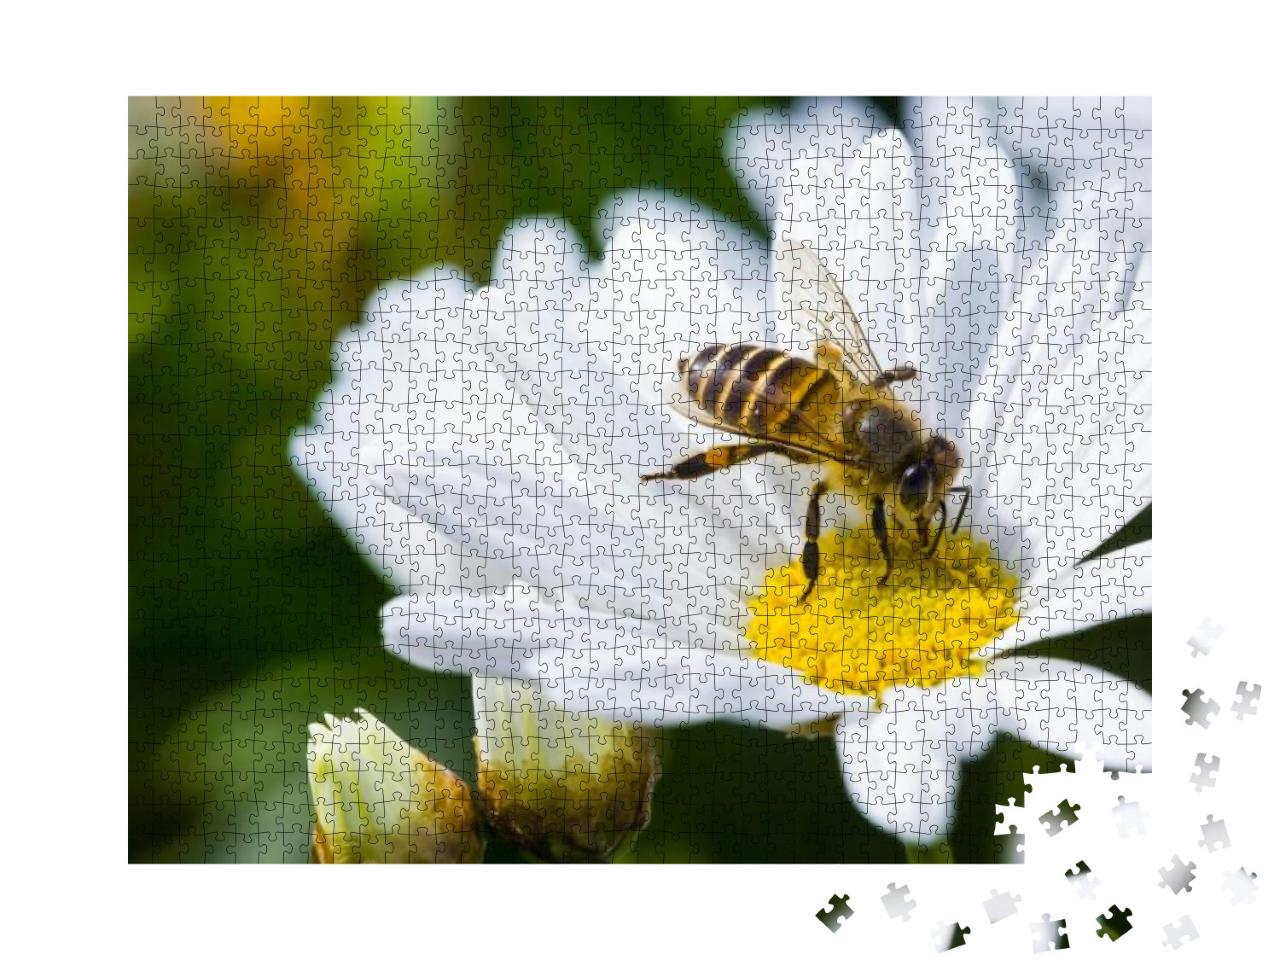 Spring Single Daisy Flower & Bee... Jigsaw Puzzle with 1000 pieces